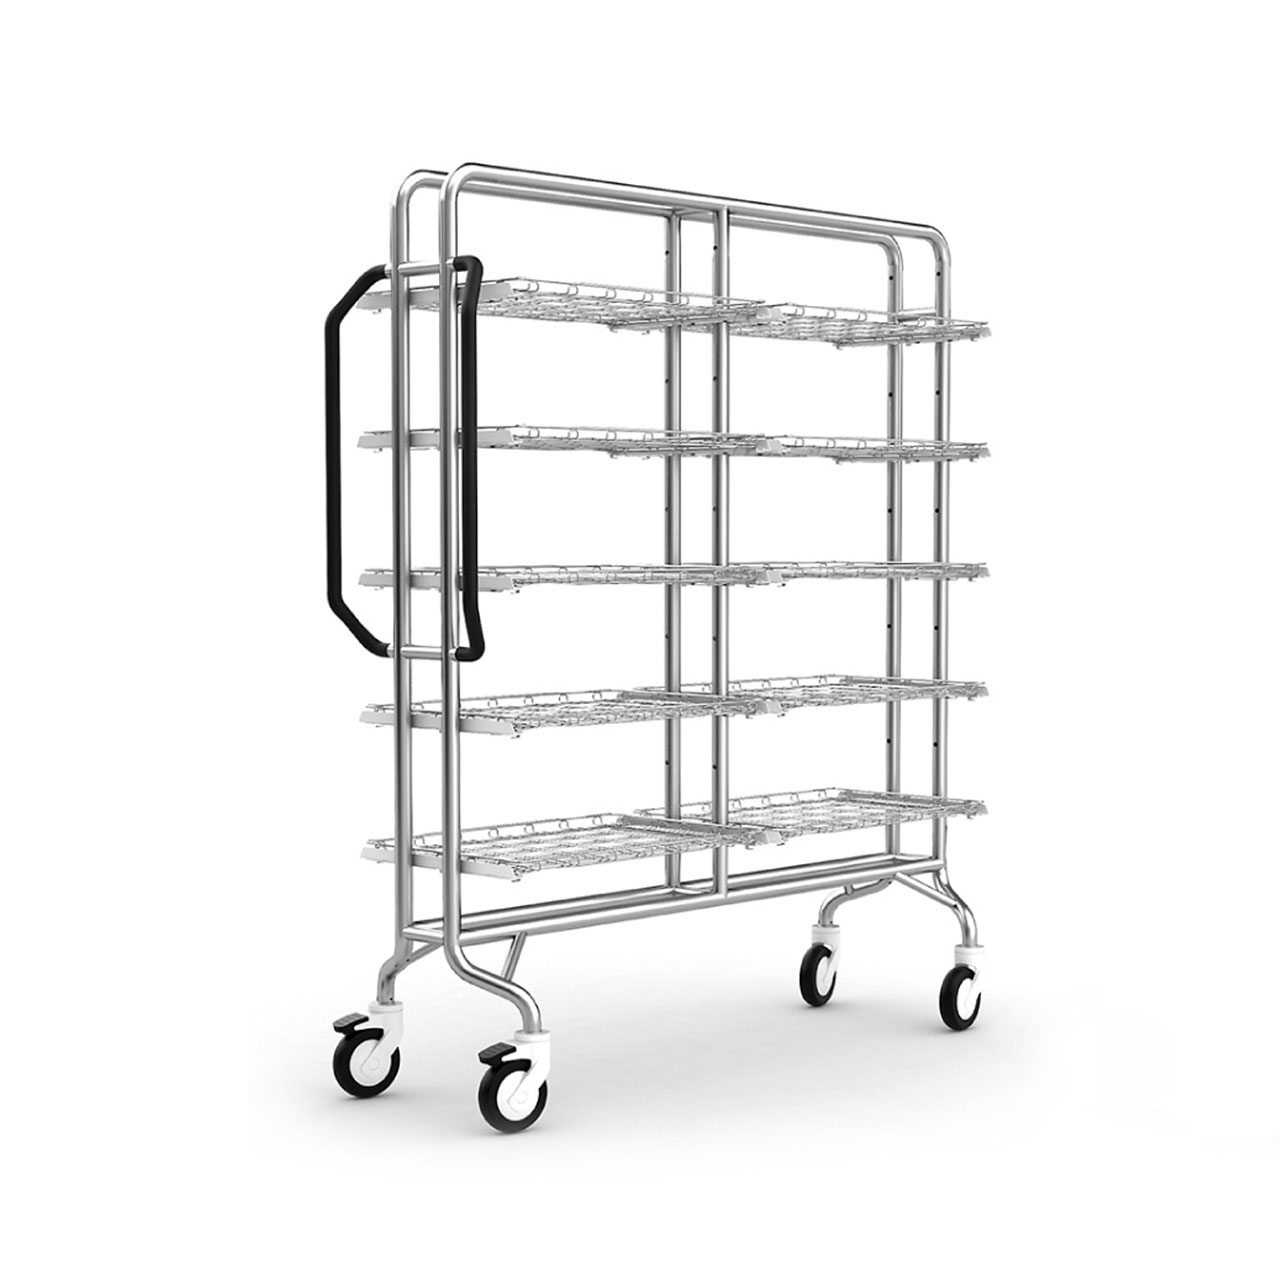 Getinge Smart Distribution Trolleys Open are available in single or double versions of each model